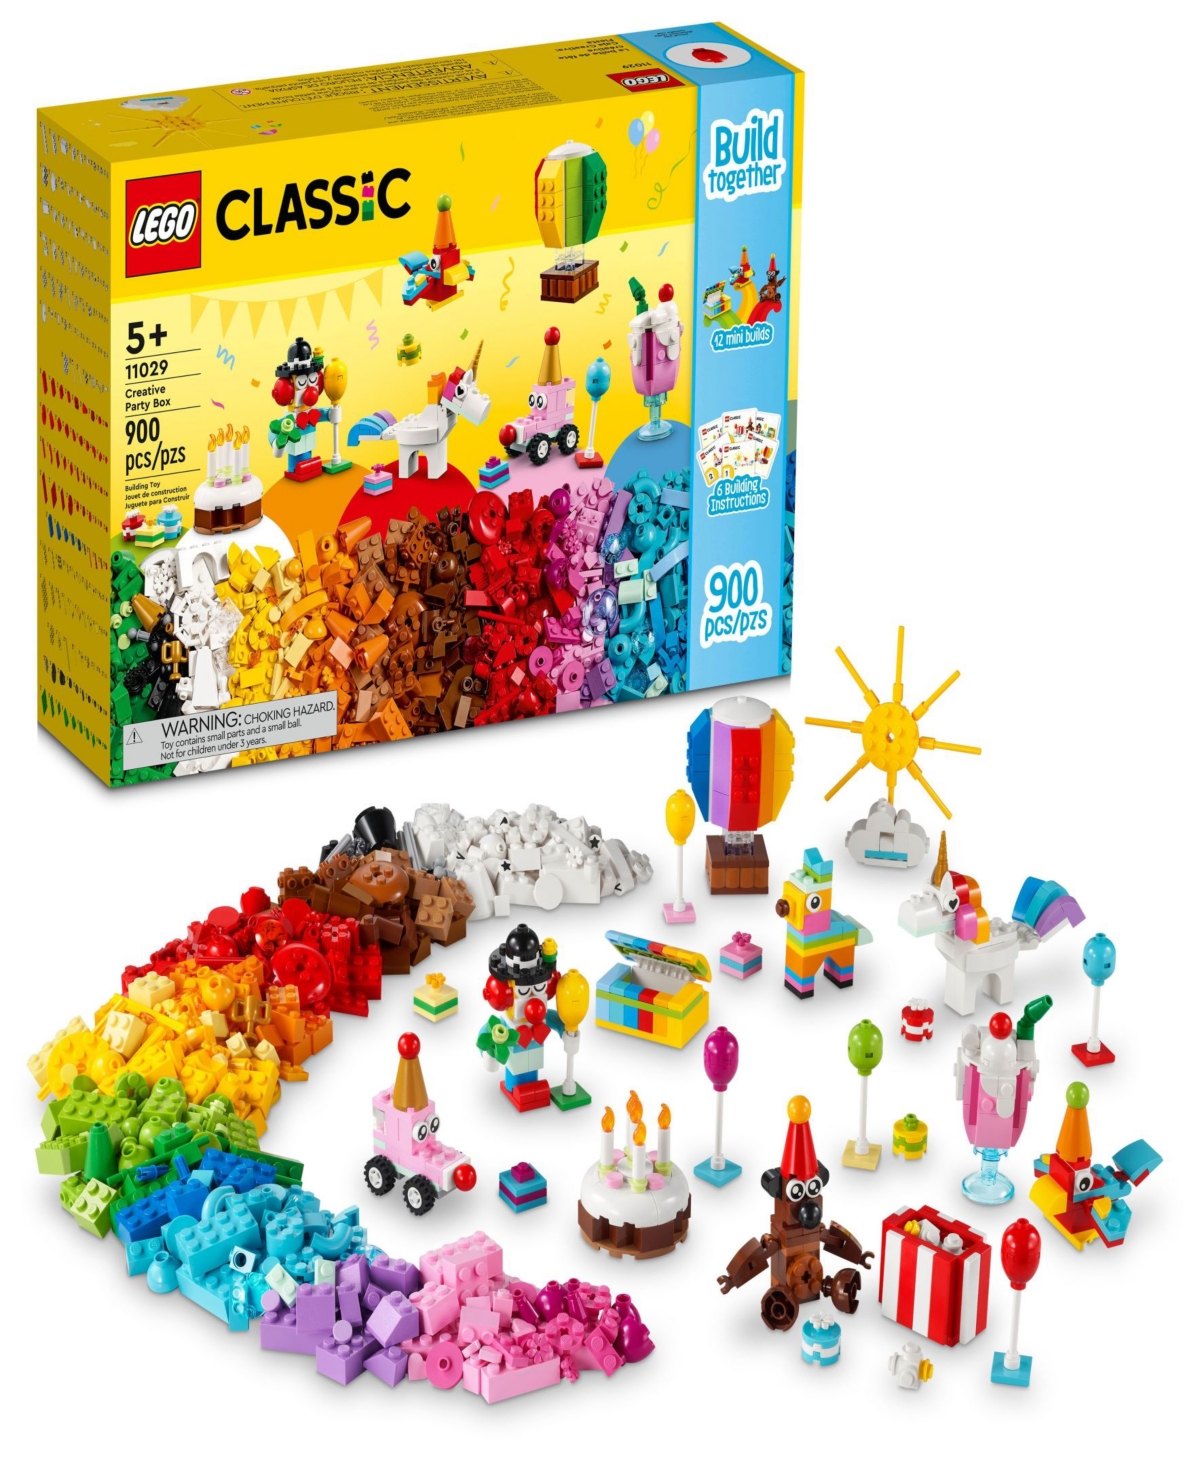 Lego Classic 11029 Creative Party Box Toy Assorted Piece Brick Expansion Building Set In Multicolor